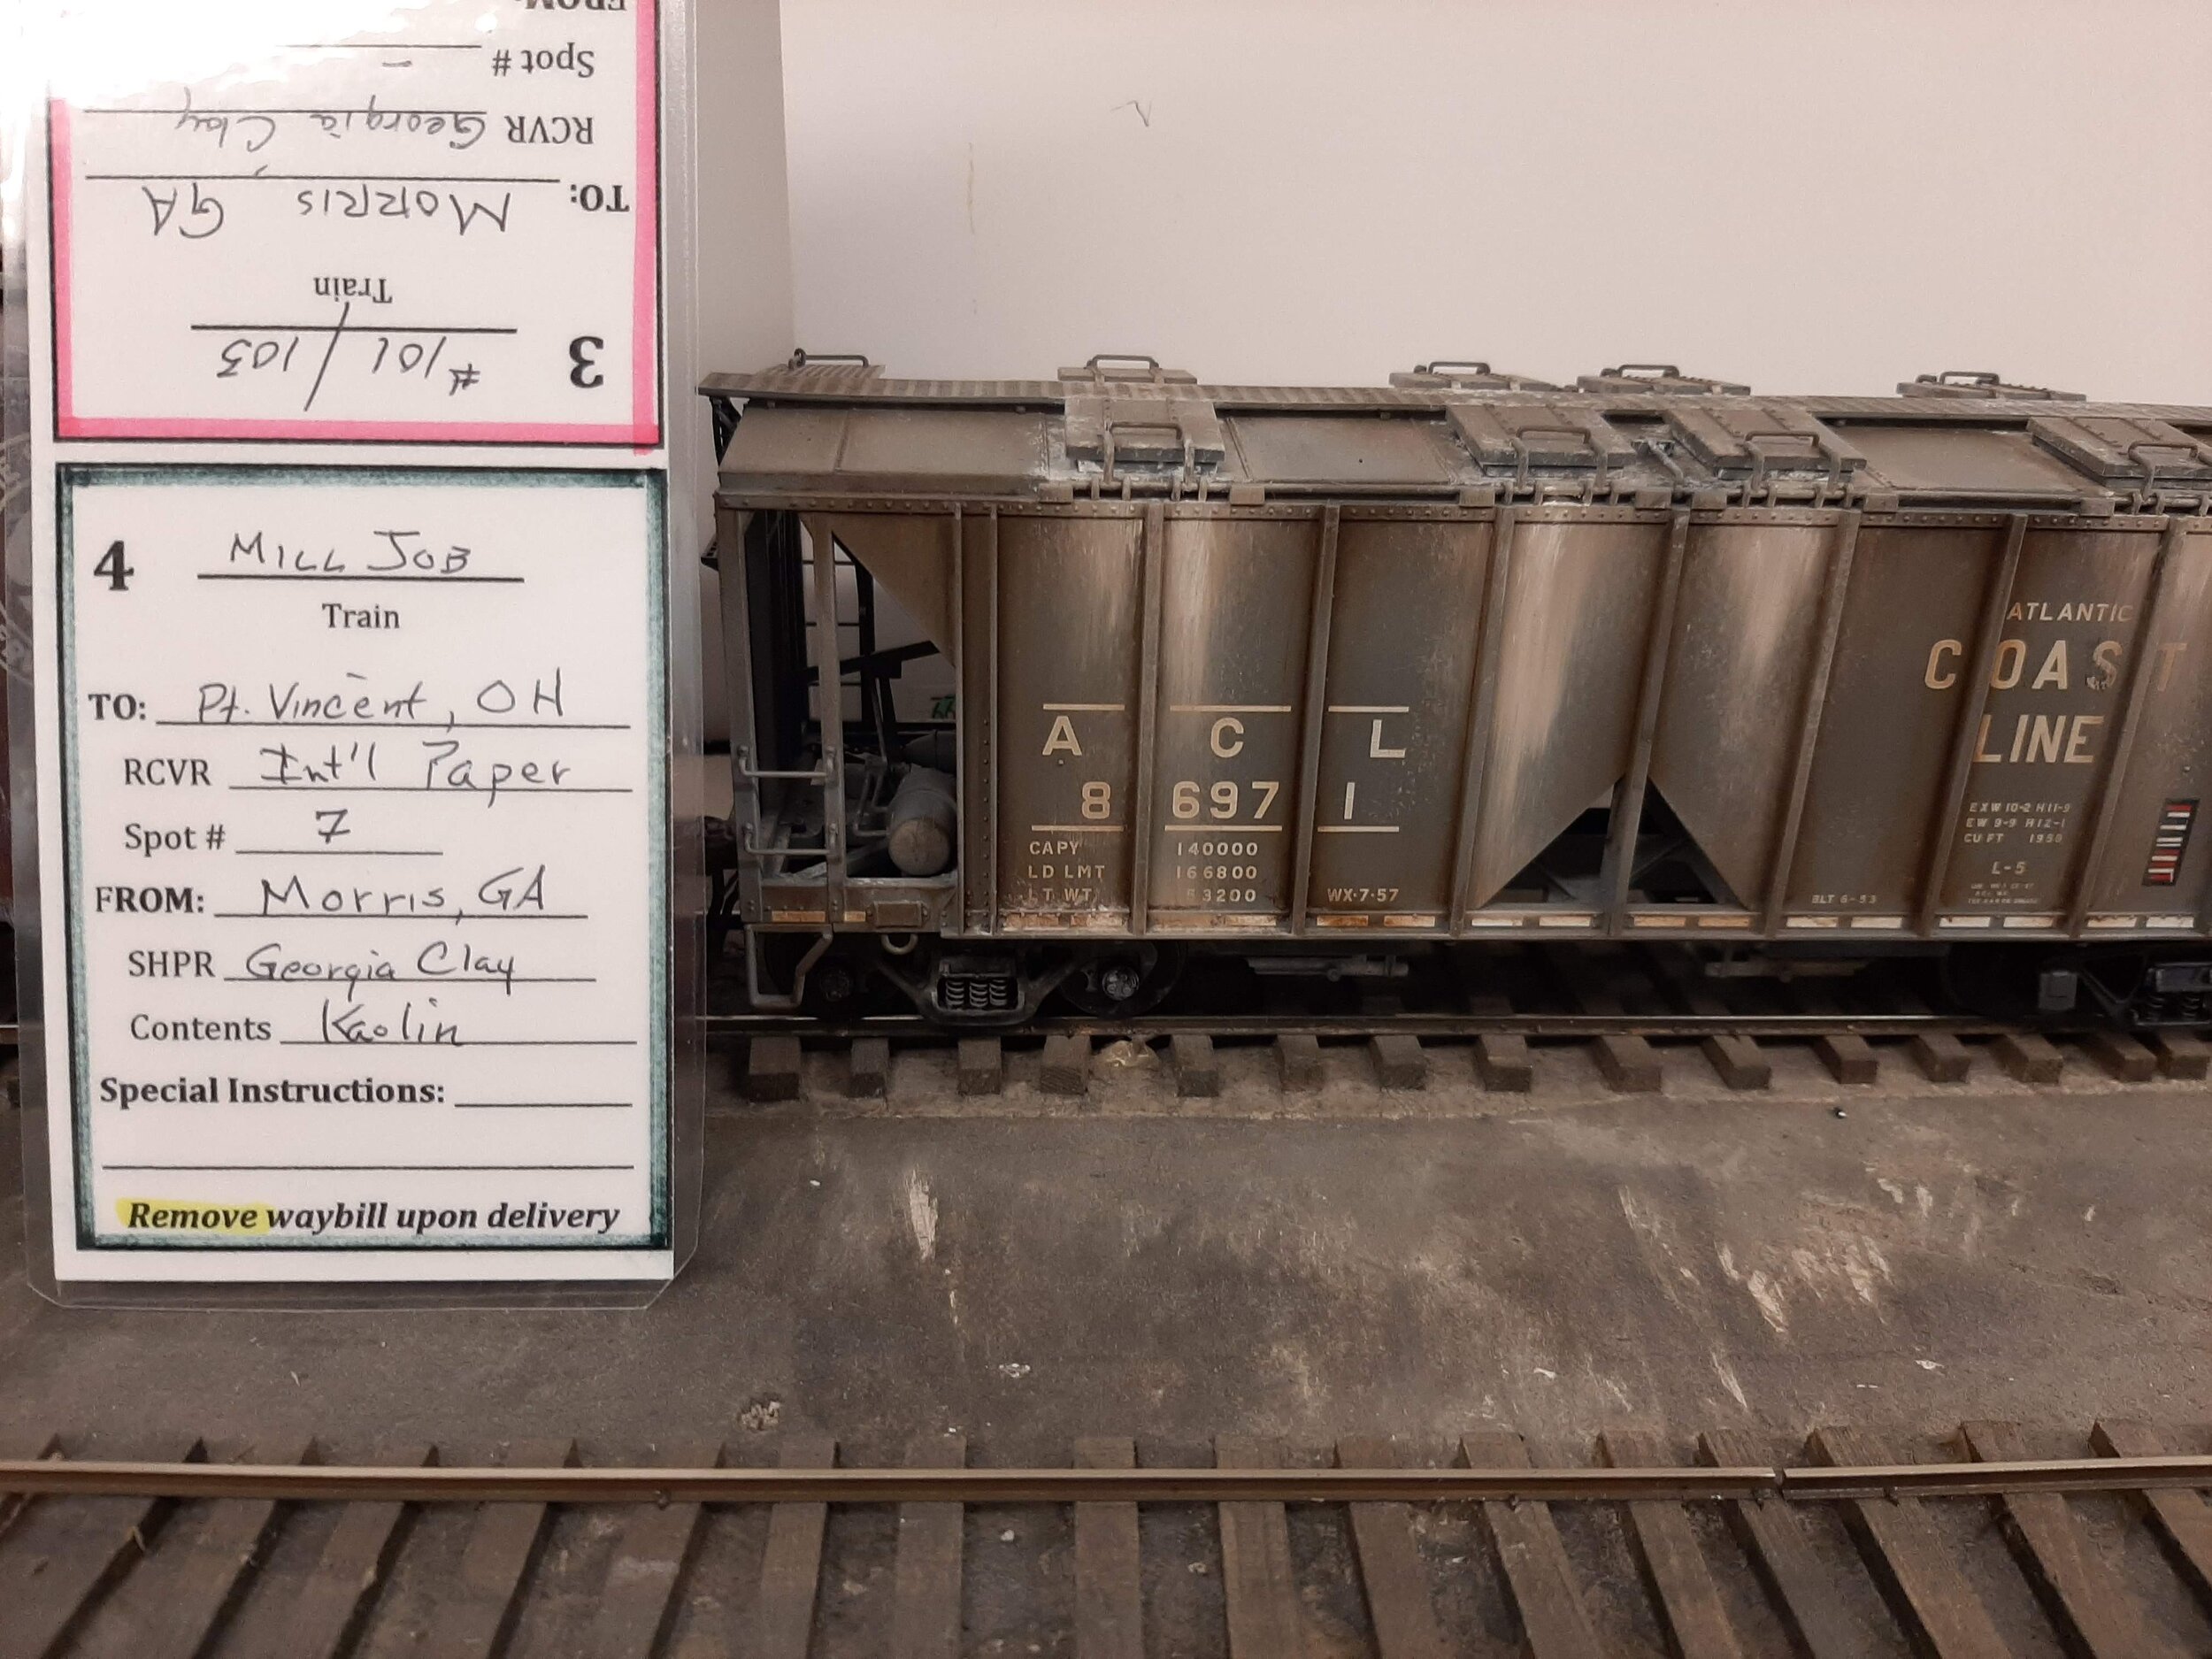  This waybill says to “Remove..” when delivered. Thus ACL86971 which carries kolin clay for paper making will return to it’s car card MTY destination. (see Operating Positions page). Of note is the use of colors on the waybill. This is for help in cl